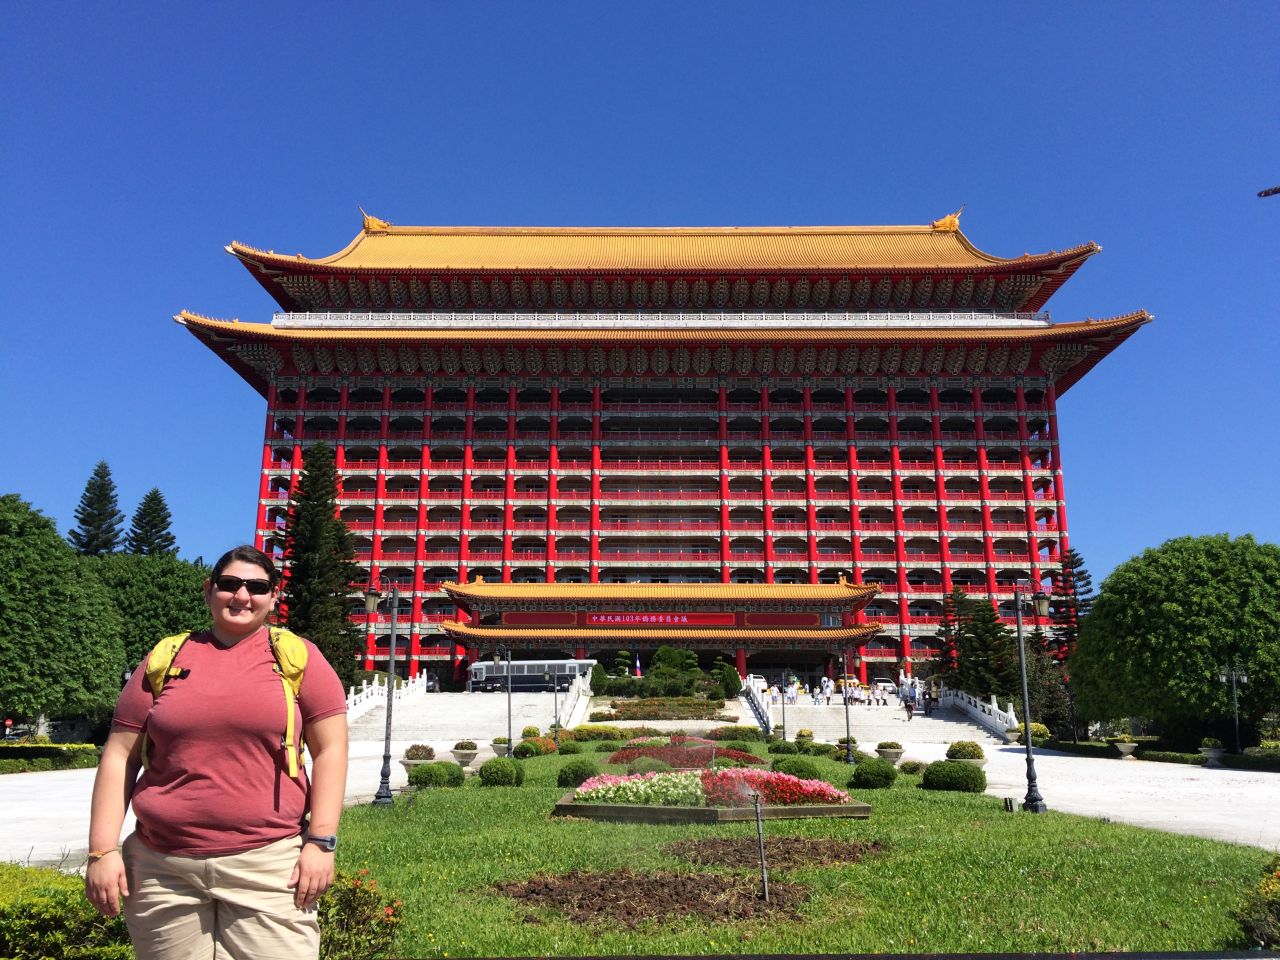 "2014, in front of the Grand Hotel in Taipei, Taiwan. You won't be seeing any of these pictures on Facebook or Instagram. This is me at my heaviest and hopefully, after this year, never again."